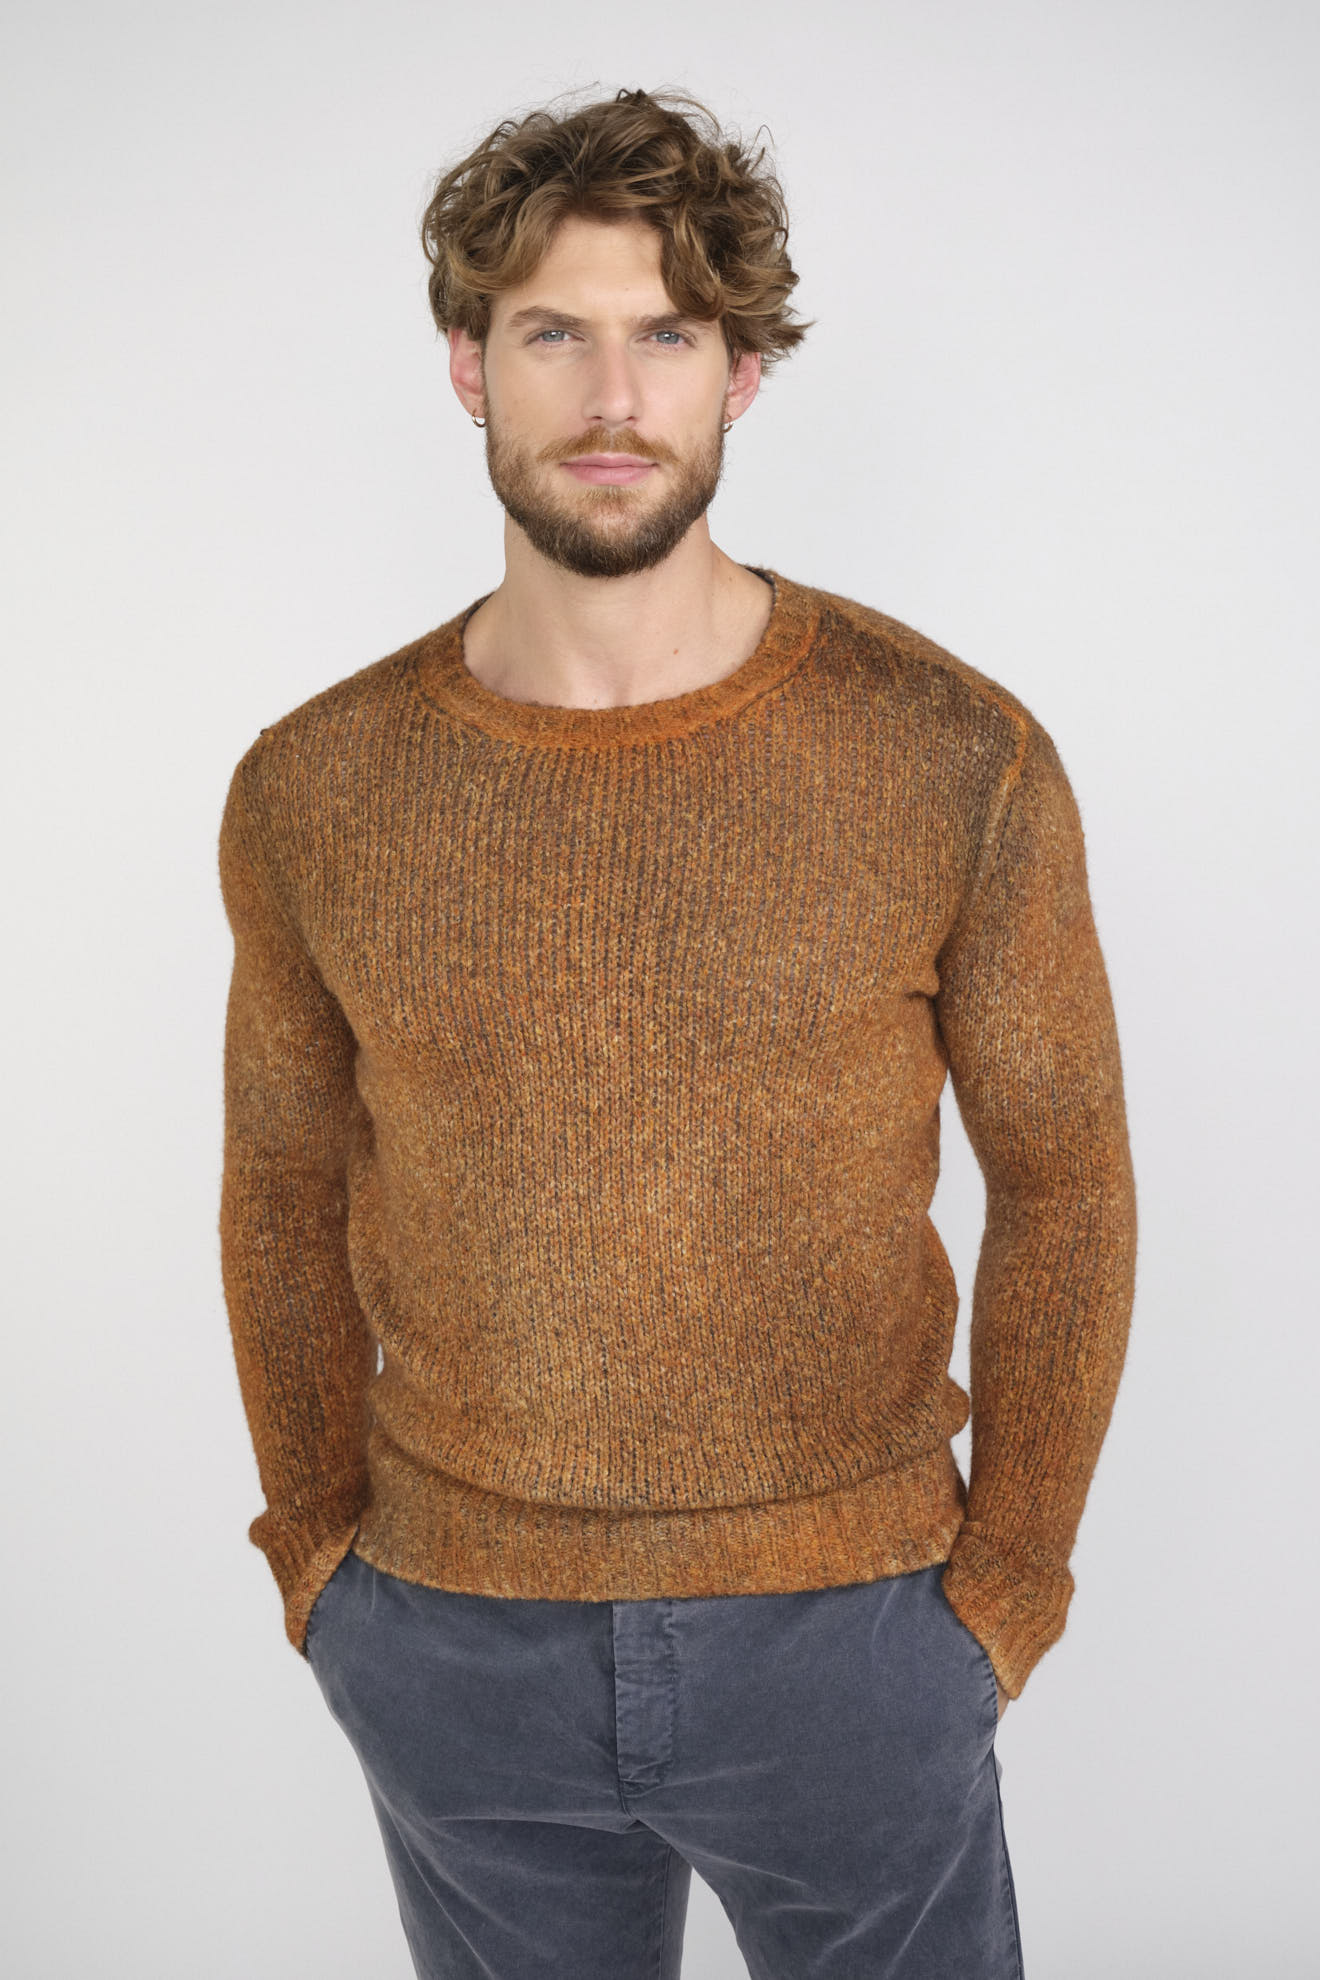 Avant Toi Knitted Jumper grey S